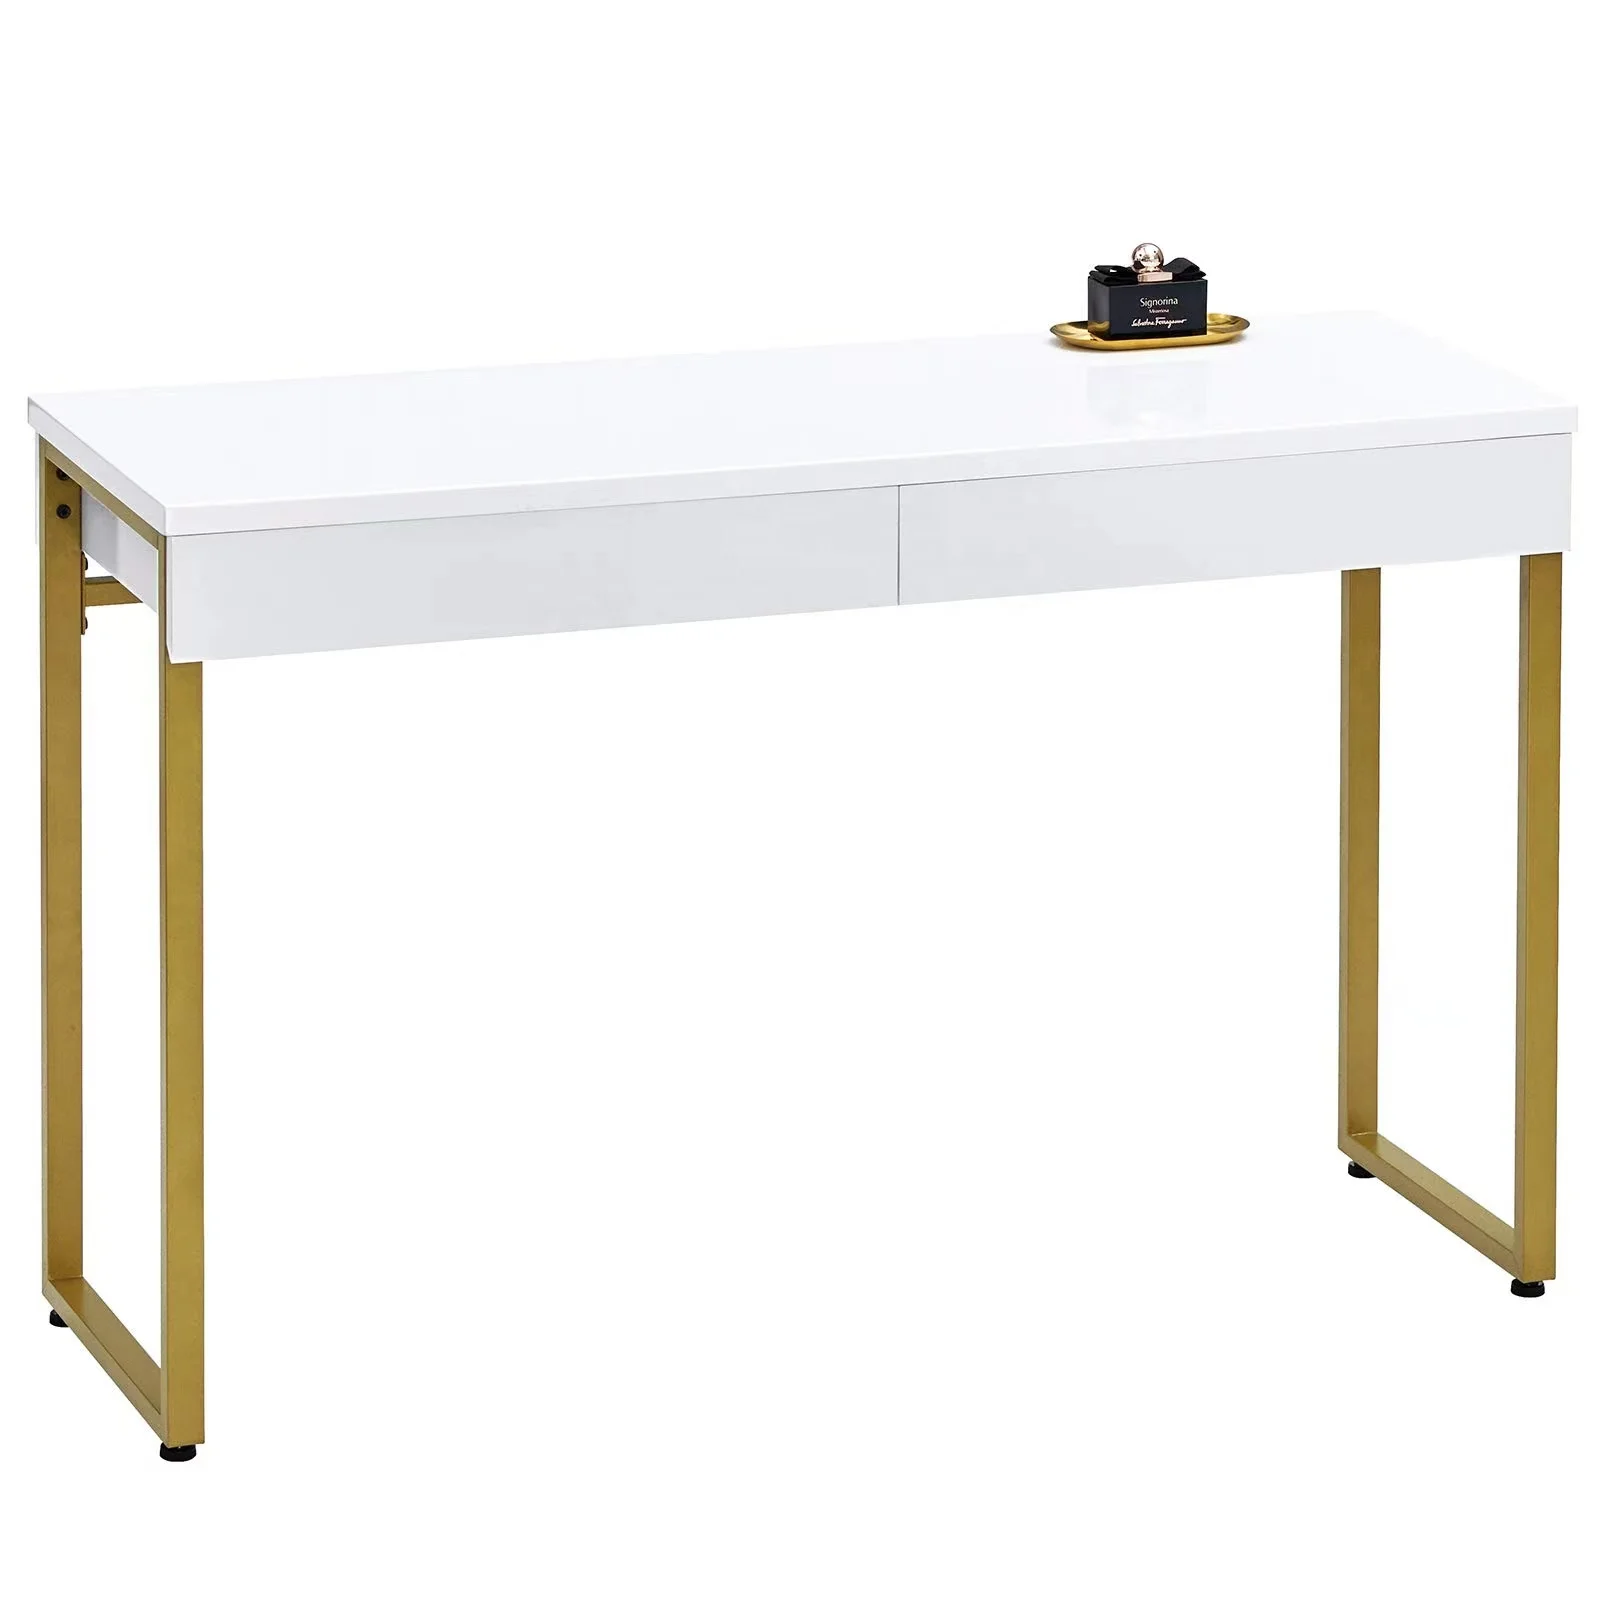 

Table de manicure et-pedicure for beauty salon Gold nail desk ready to ship Portable manicure table ready to ship, Optional